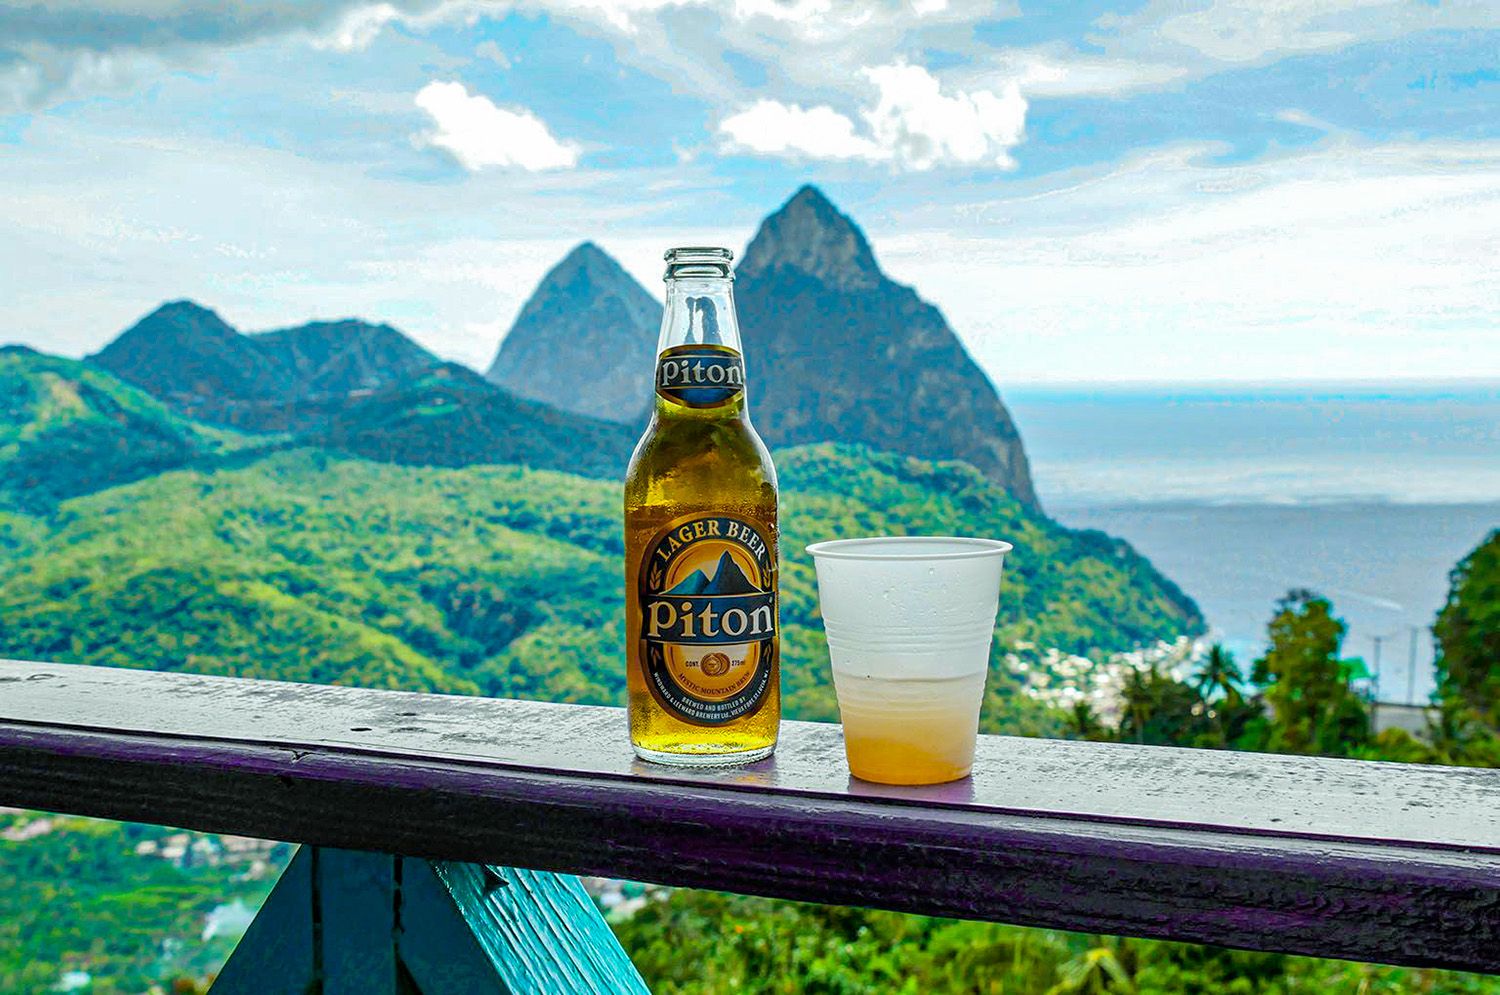 Piton-beer-1